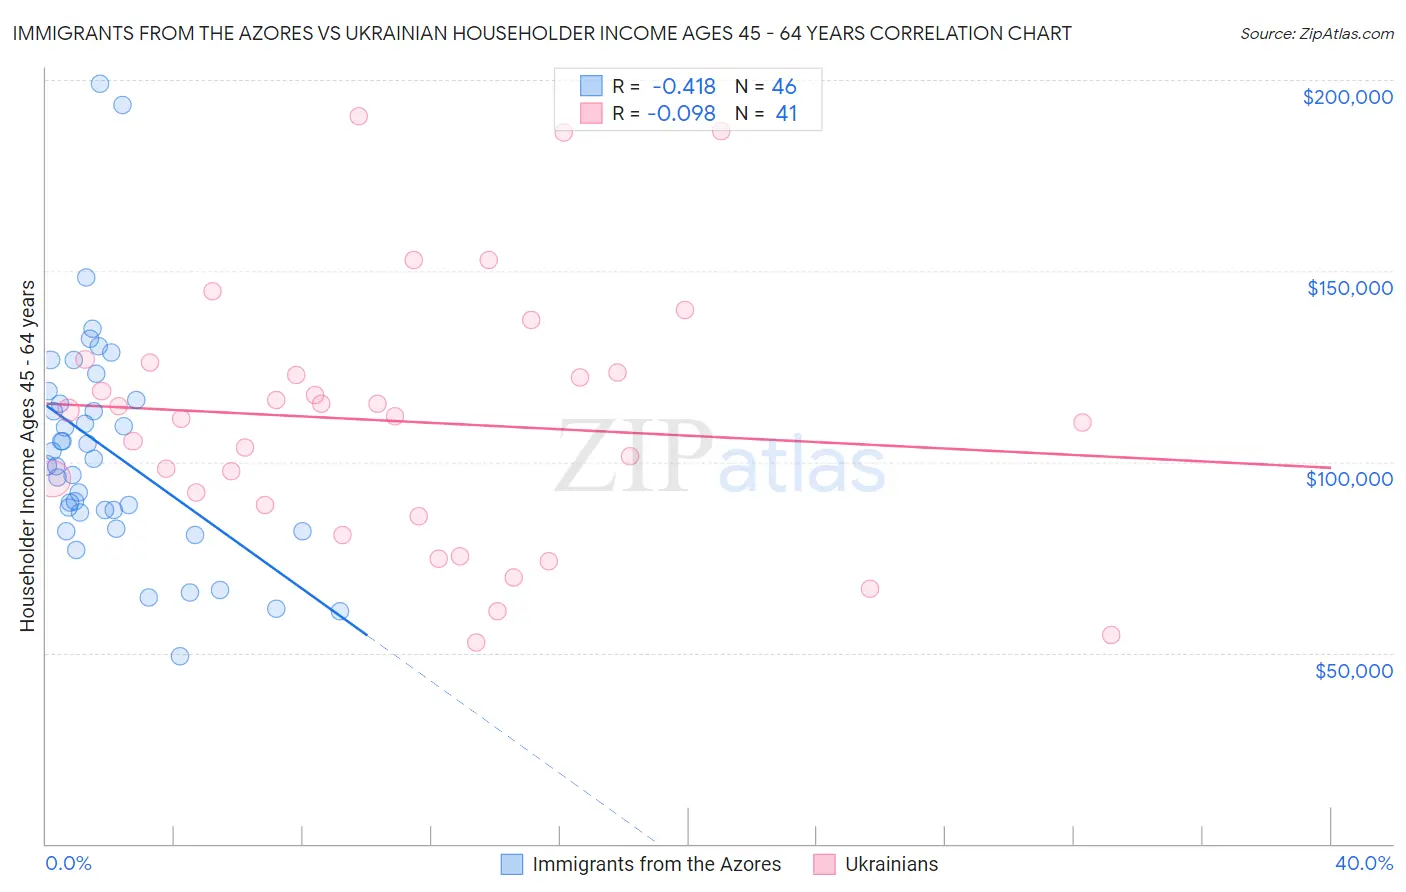 Immigrants from the Azores vs Ukrainian Householder Income Ages 45 - 64 years